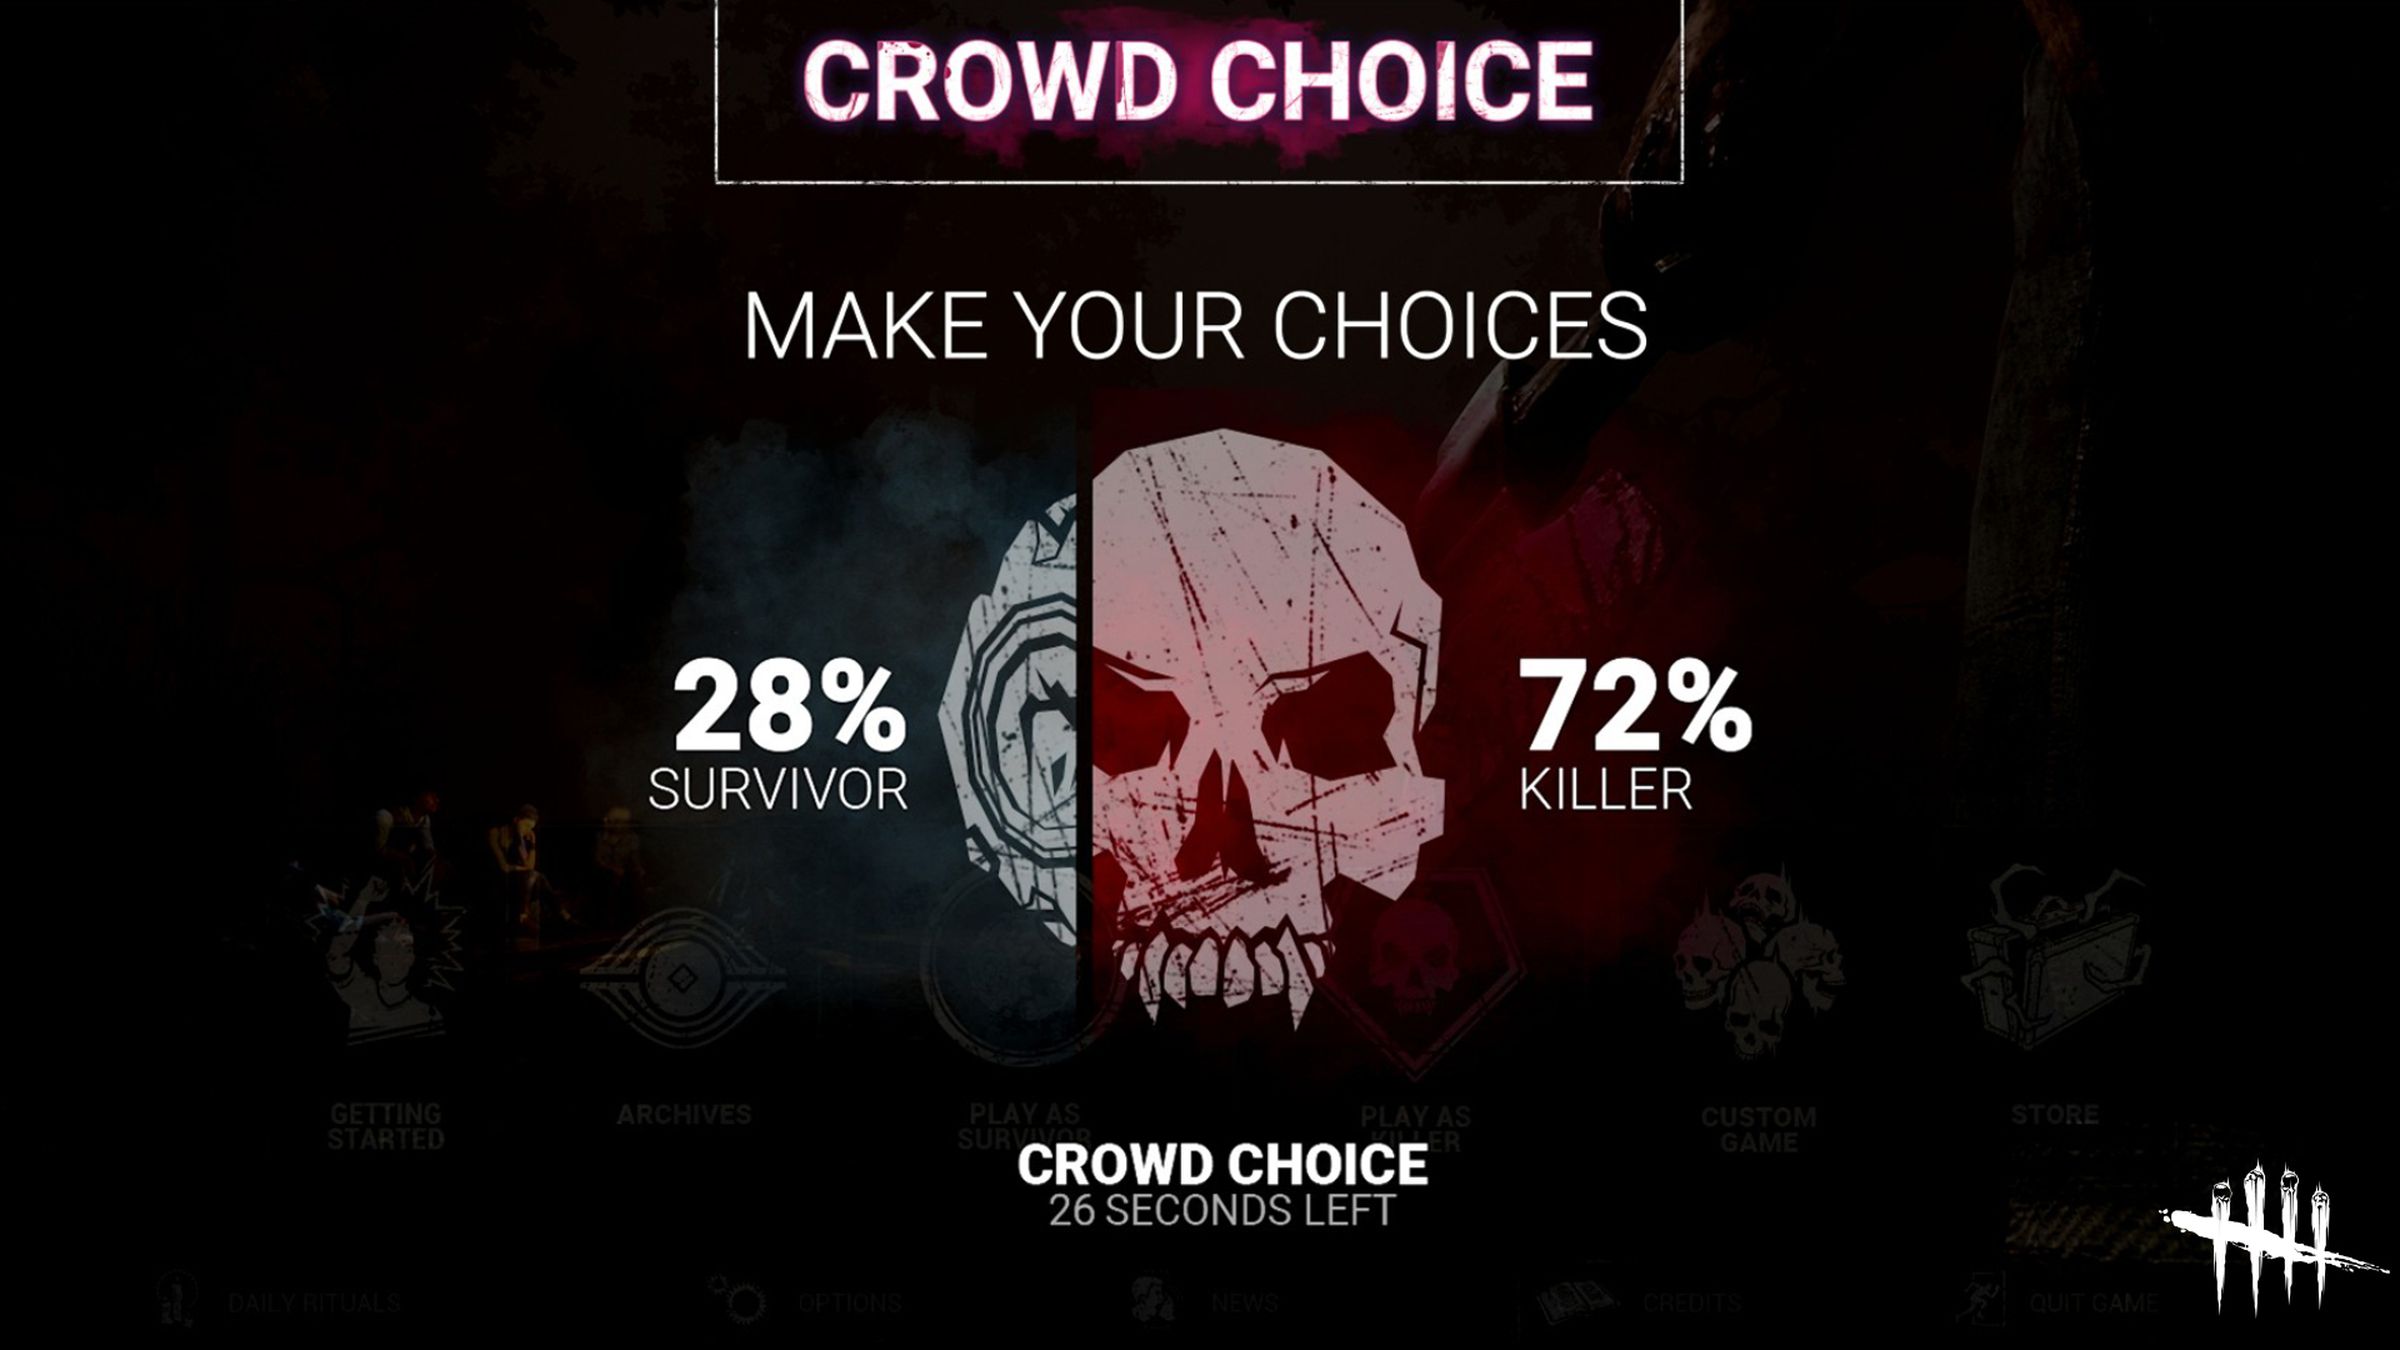 Dead by Daylight on Google Stadia with Crowd Choice enabled.